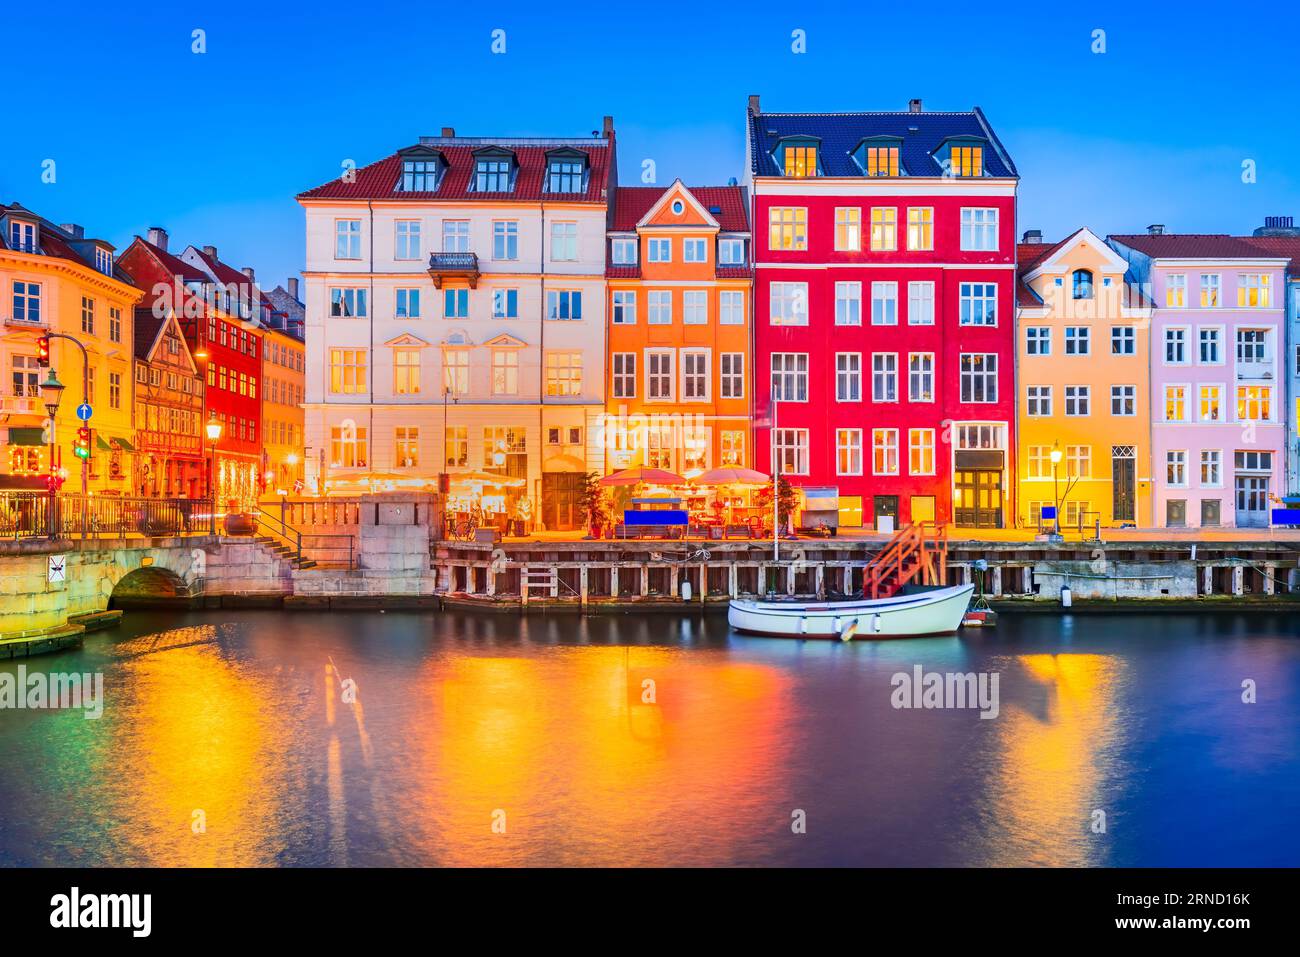 Charm of Copenhagen, Denmark at Nyhavn. Iconic canal, colorful night image and breathtaking water reflections. Stock Photo